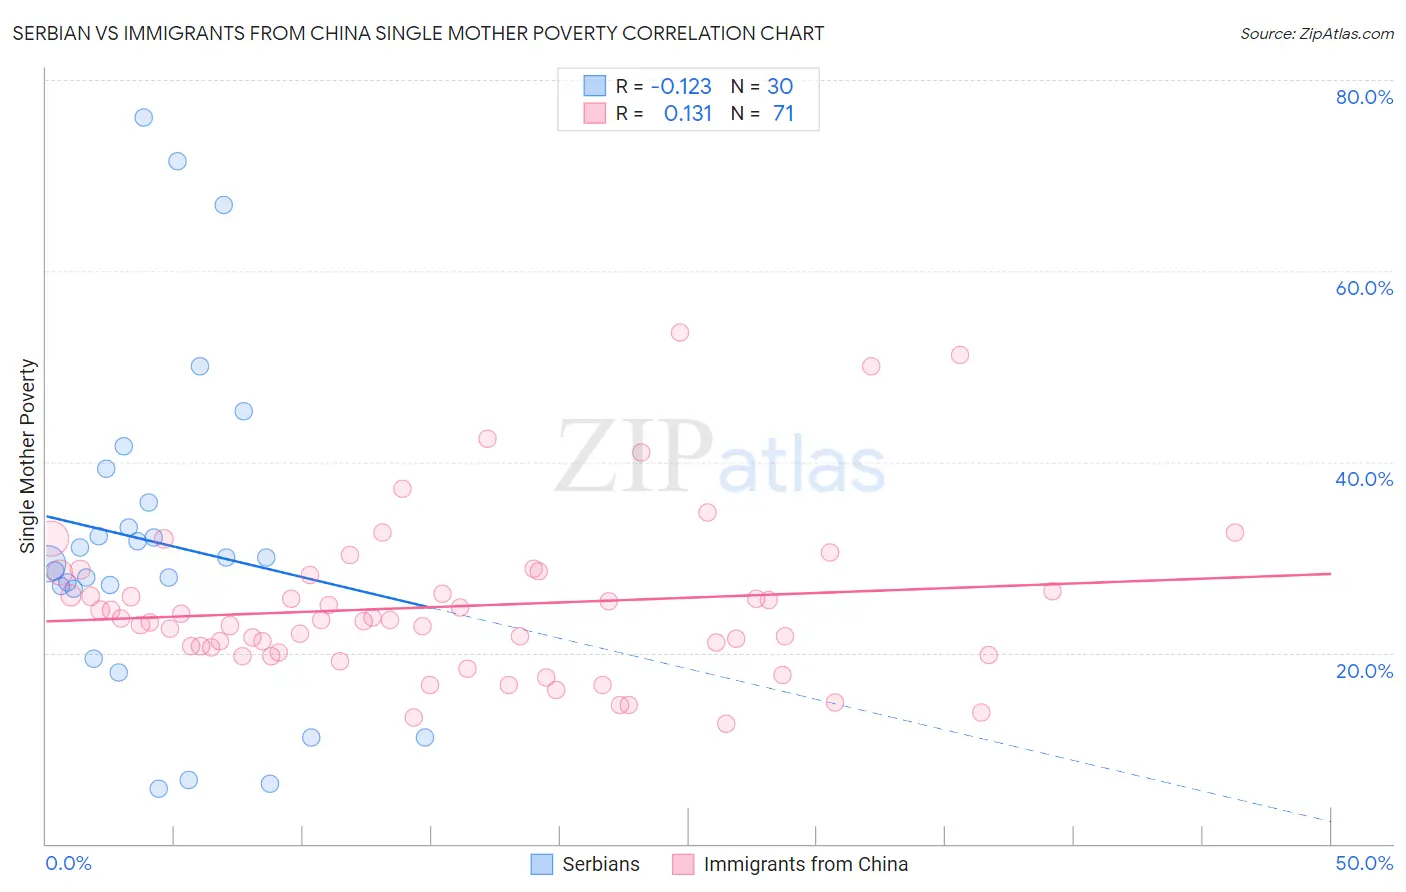 Serbian vs Immigrants from China Single Mother Poverty